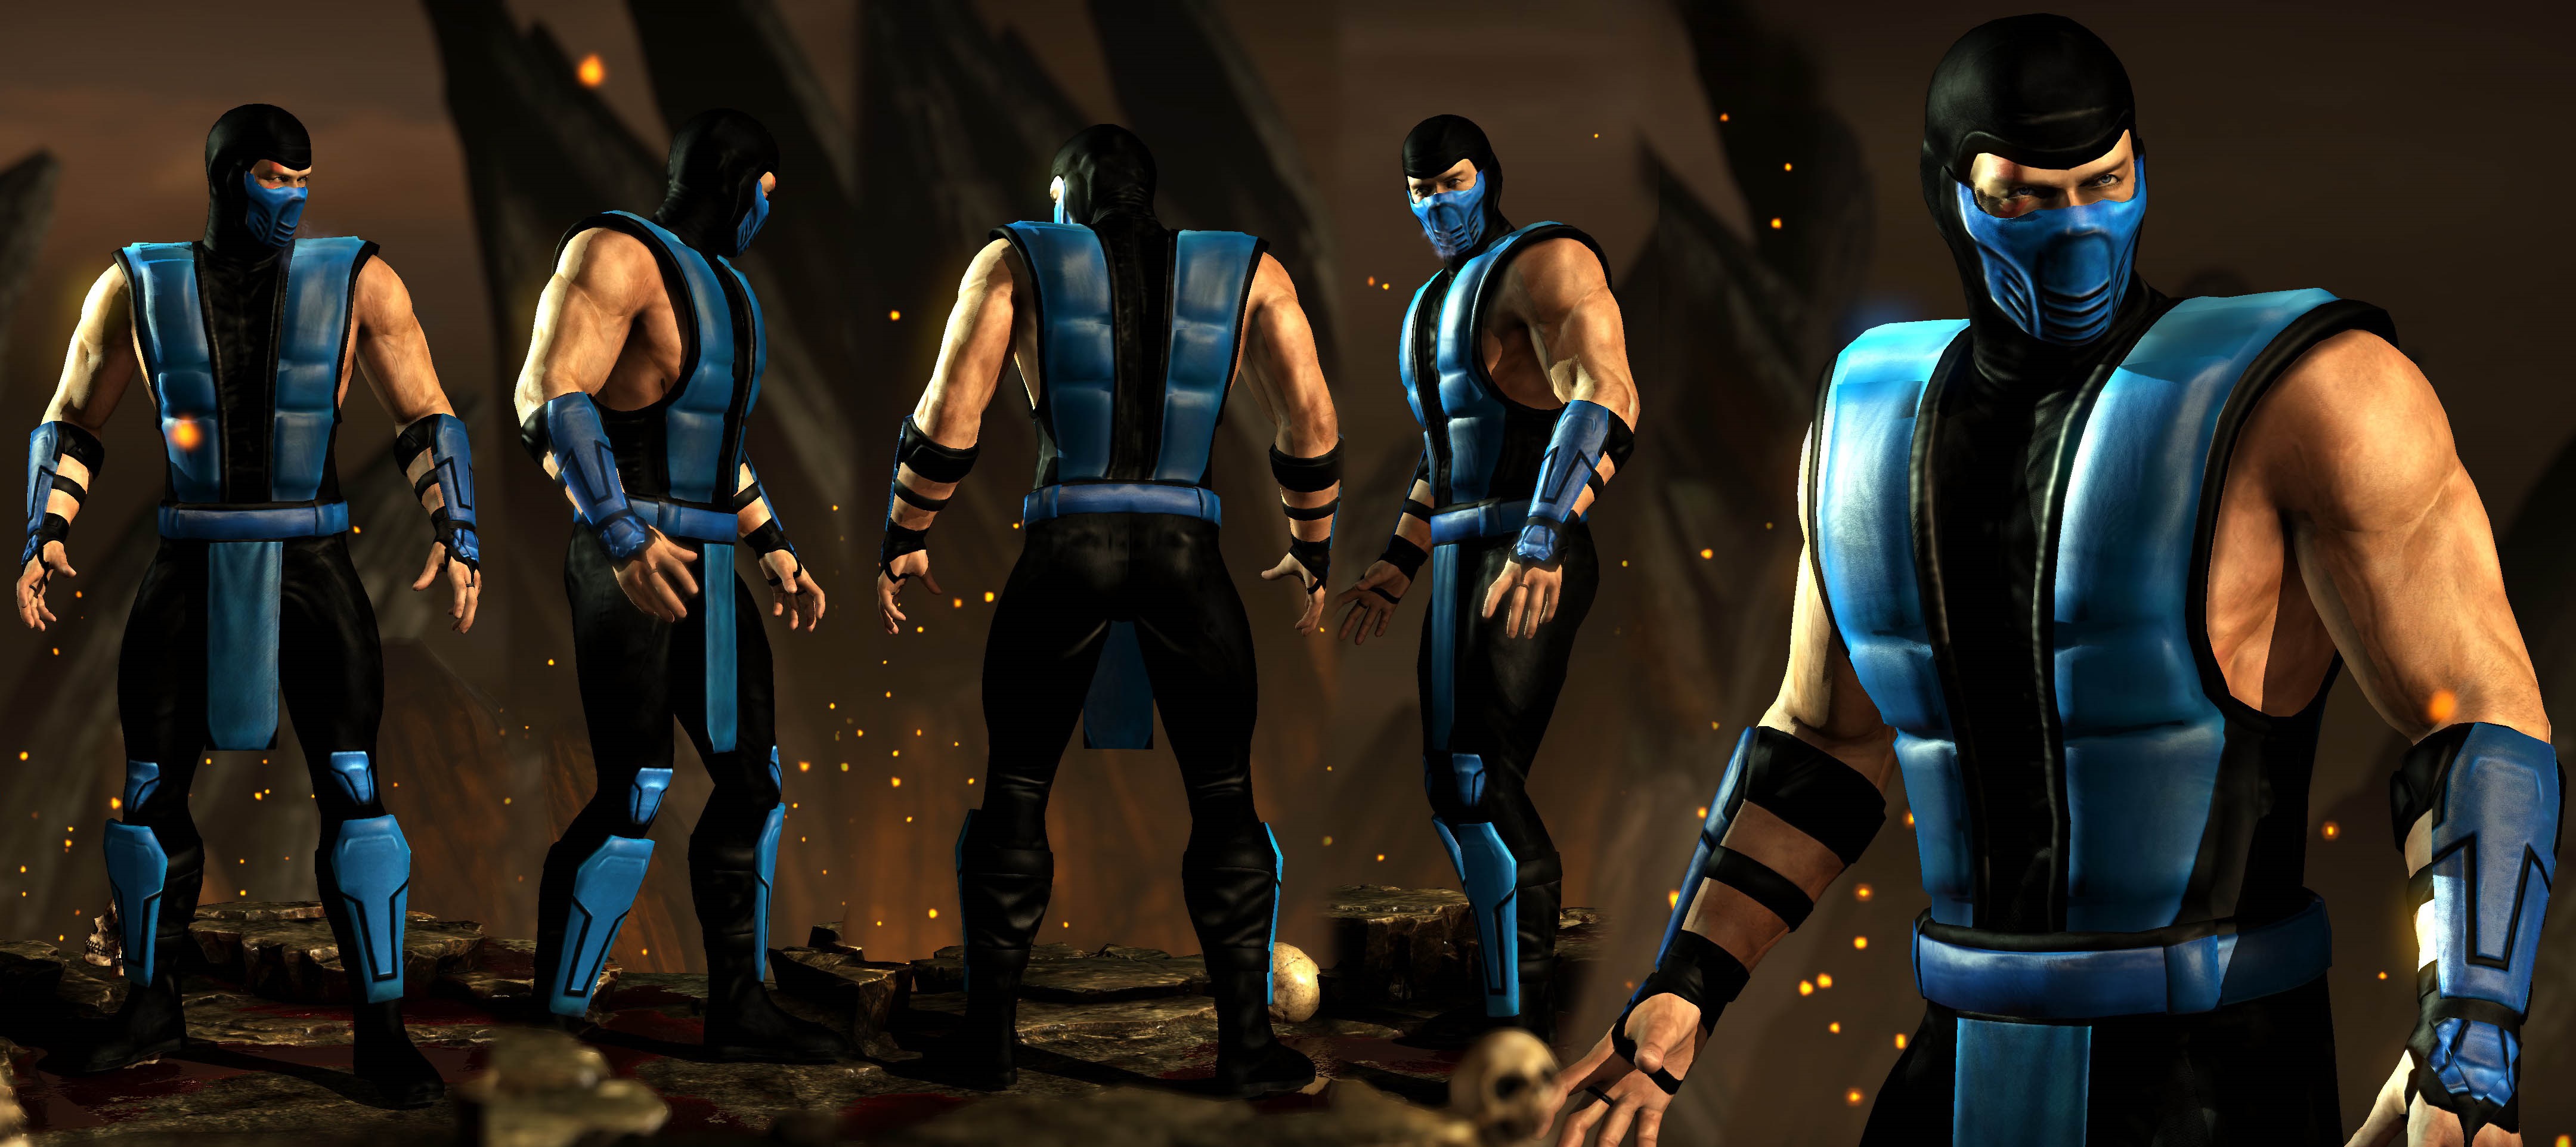 Image 4 - MKX - [ MK3 Skin Pack ] by King Kolossos mod for 